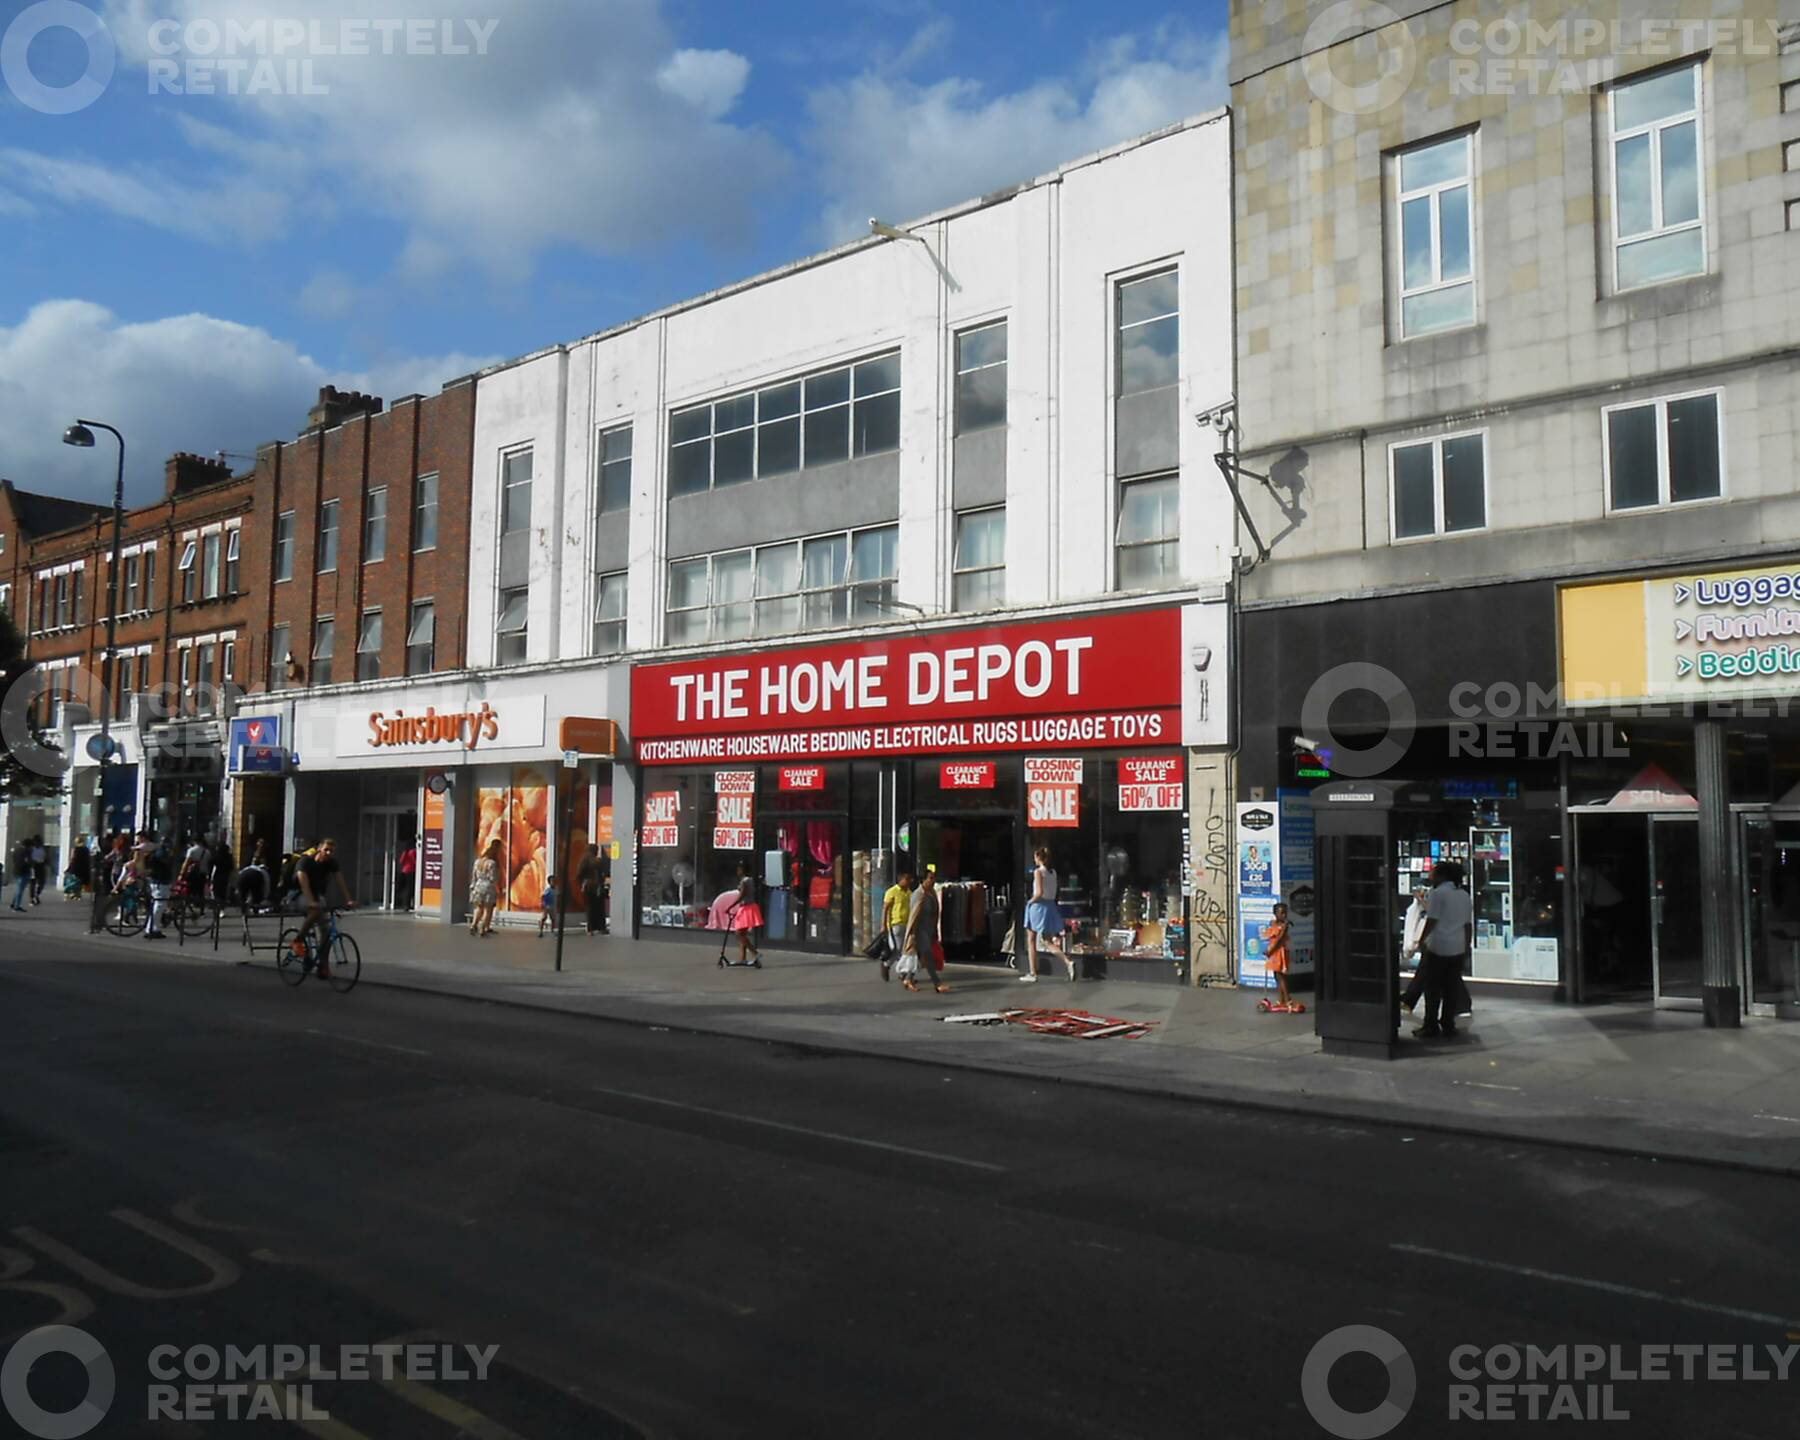 48 50 High Road Wood Green N22 6bx Completely Retail